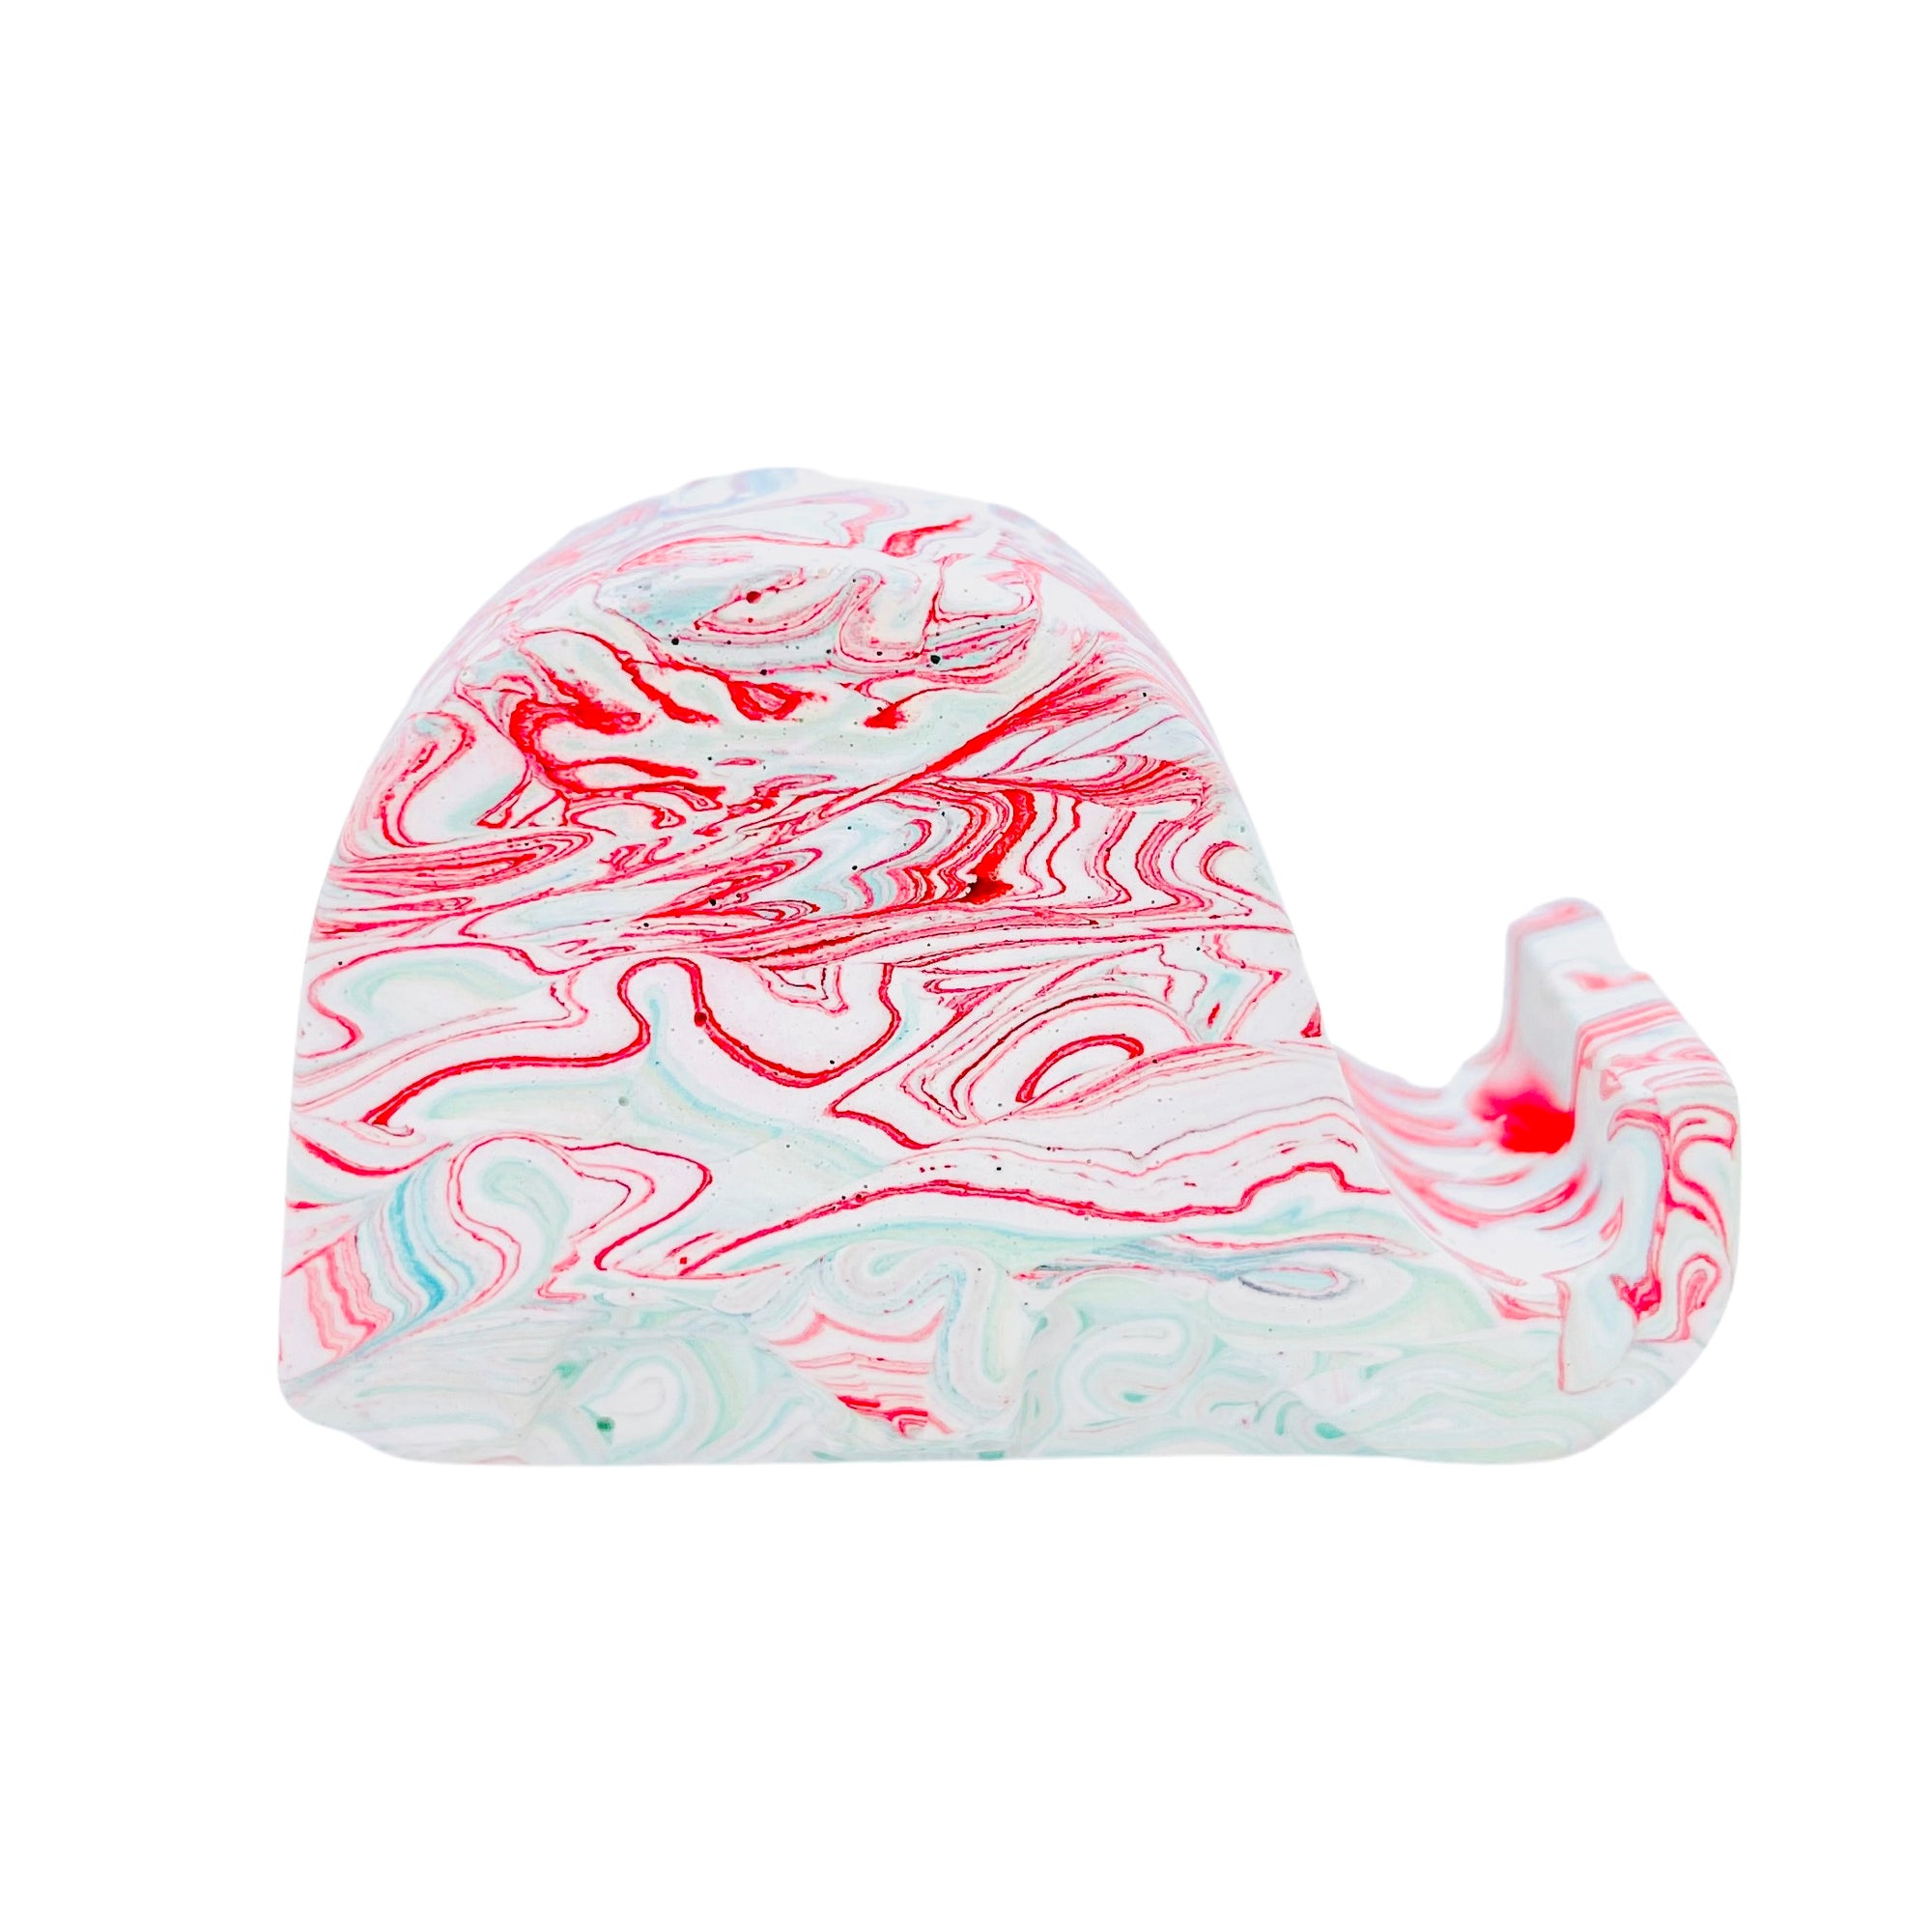 A Jesmonite elephant mobile phone stand measuring 6.5cm in length marbled with red and turquoise pigment.